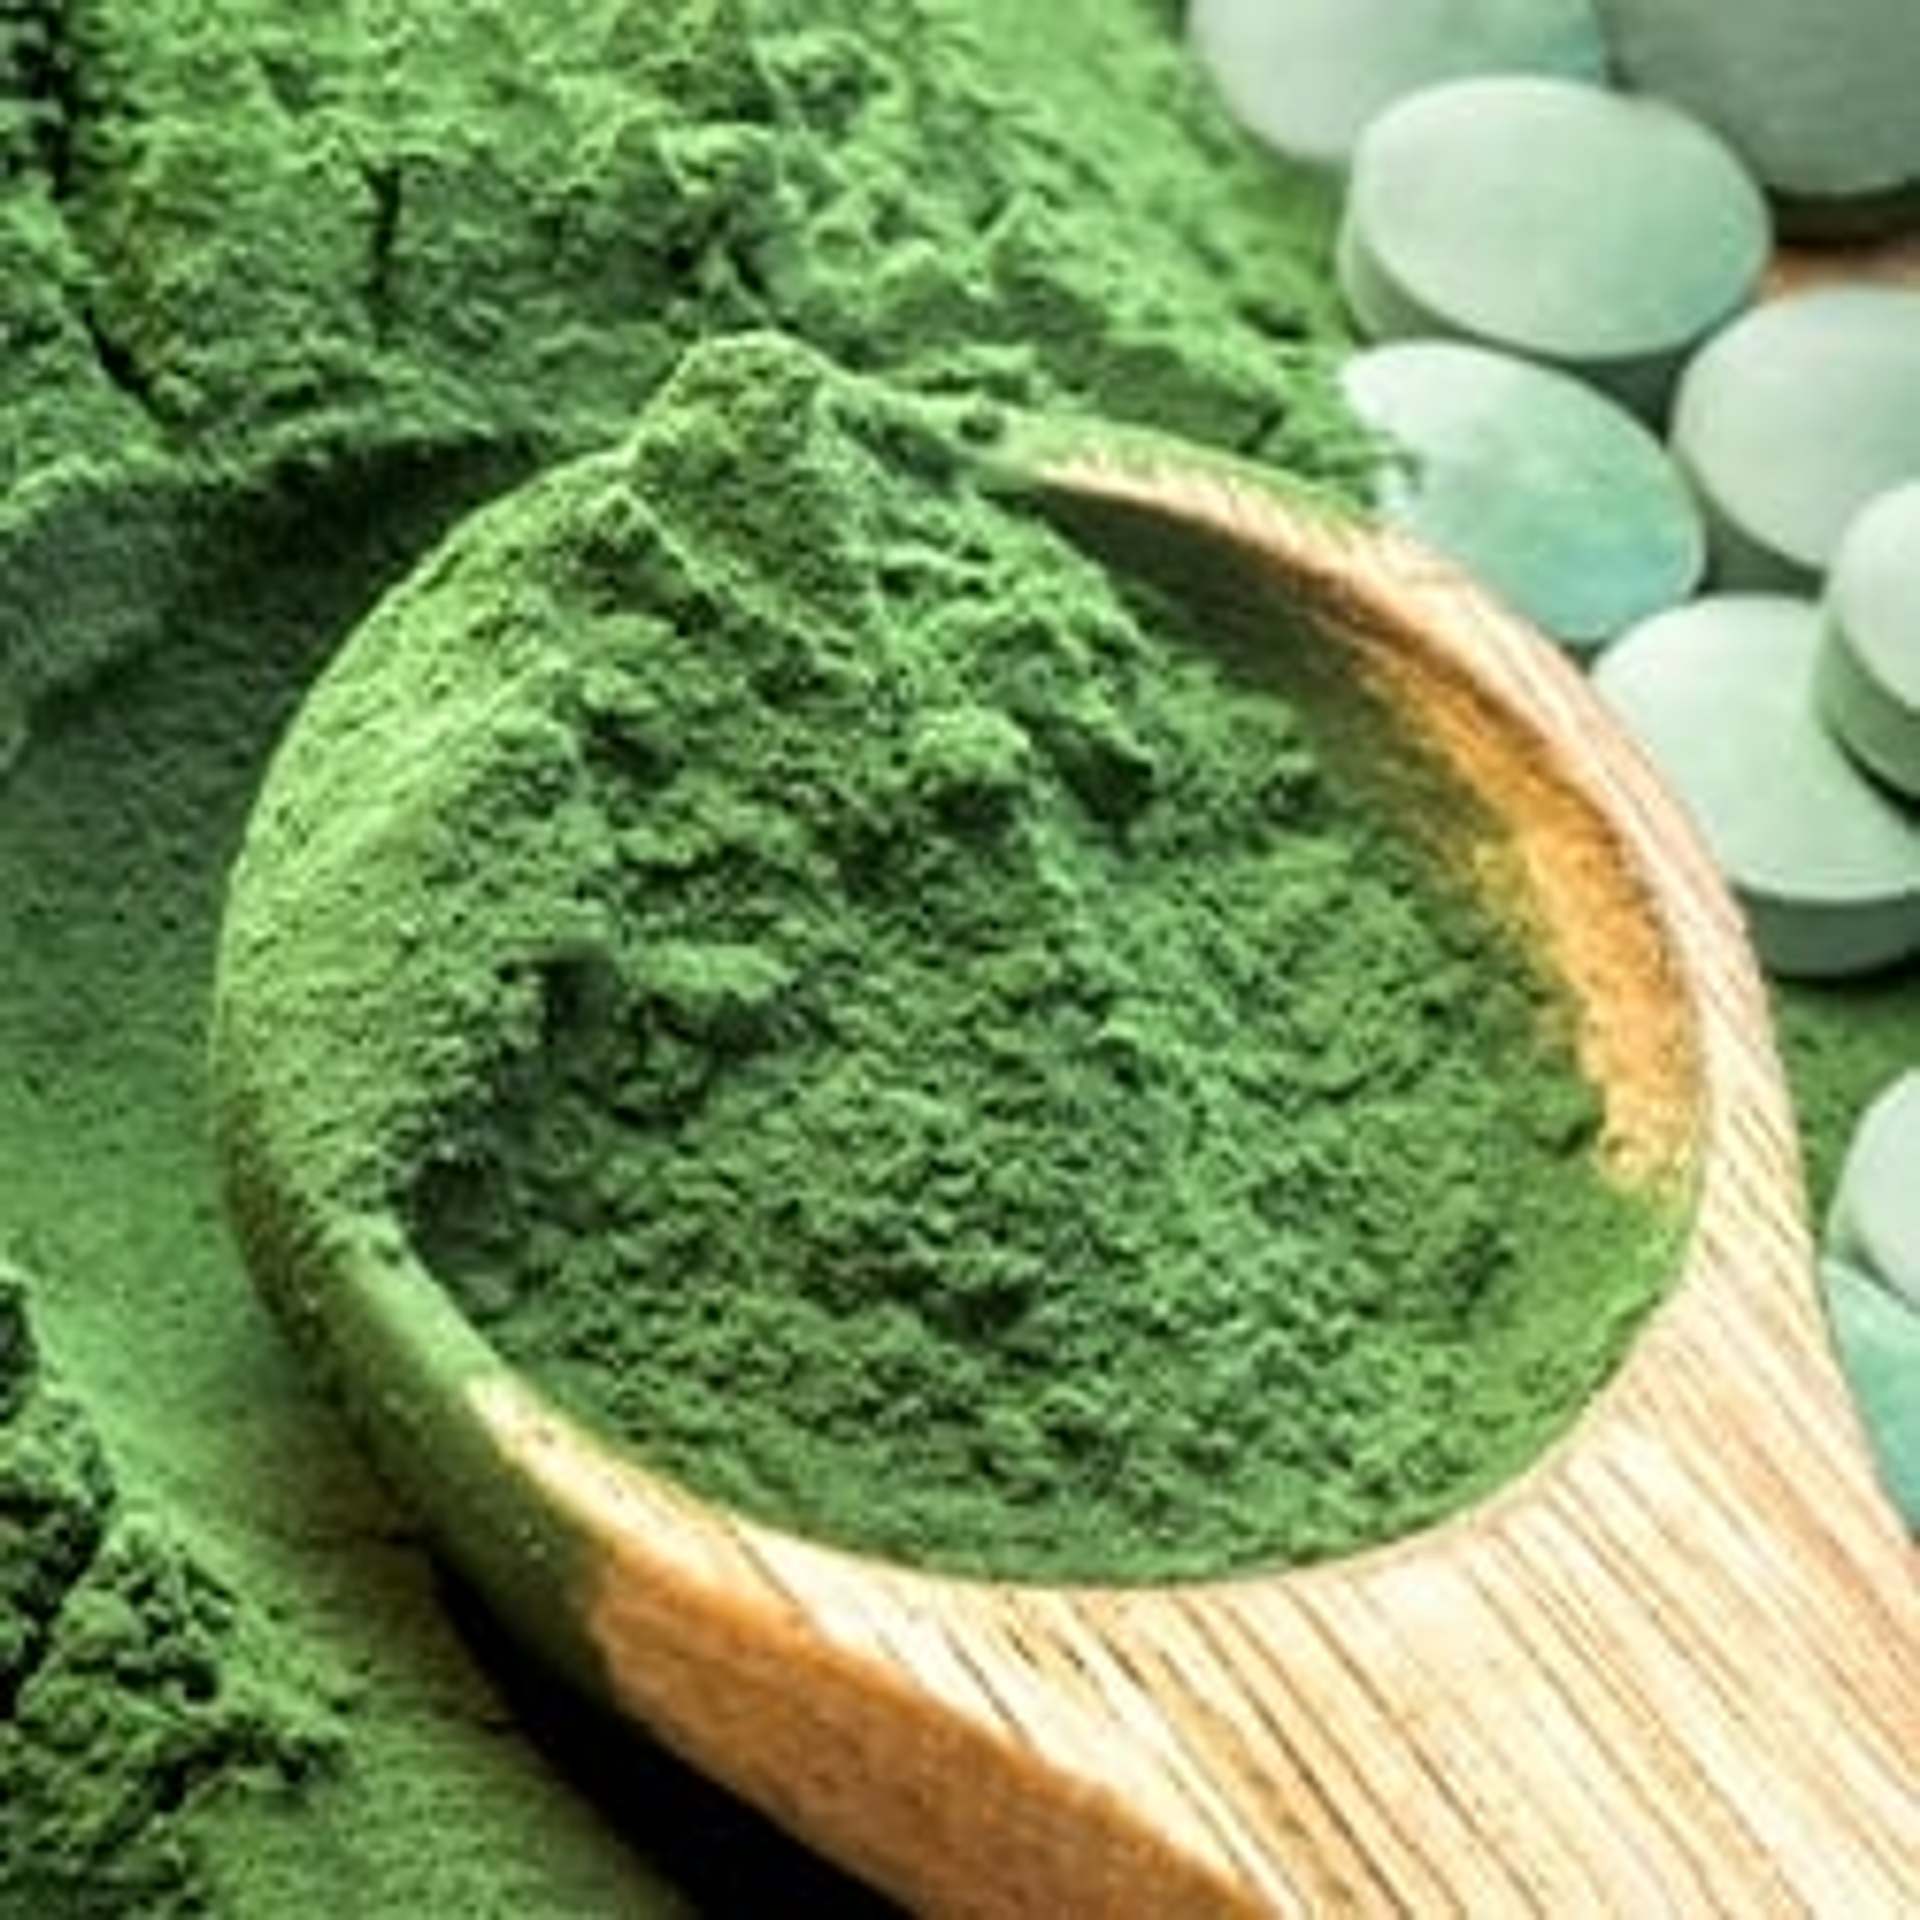 Spirulina also has an appetite suppressant effect and is often used to support diets.